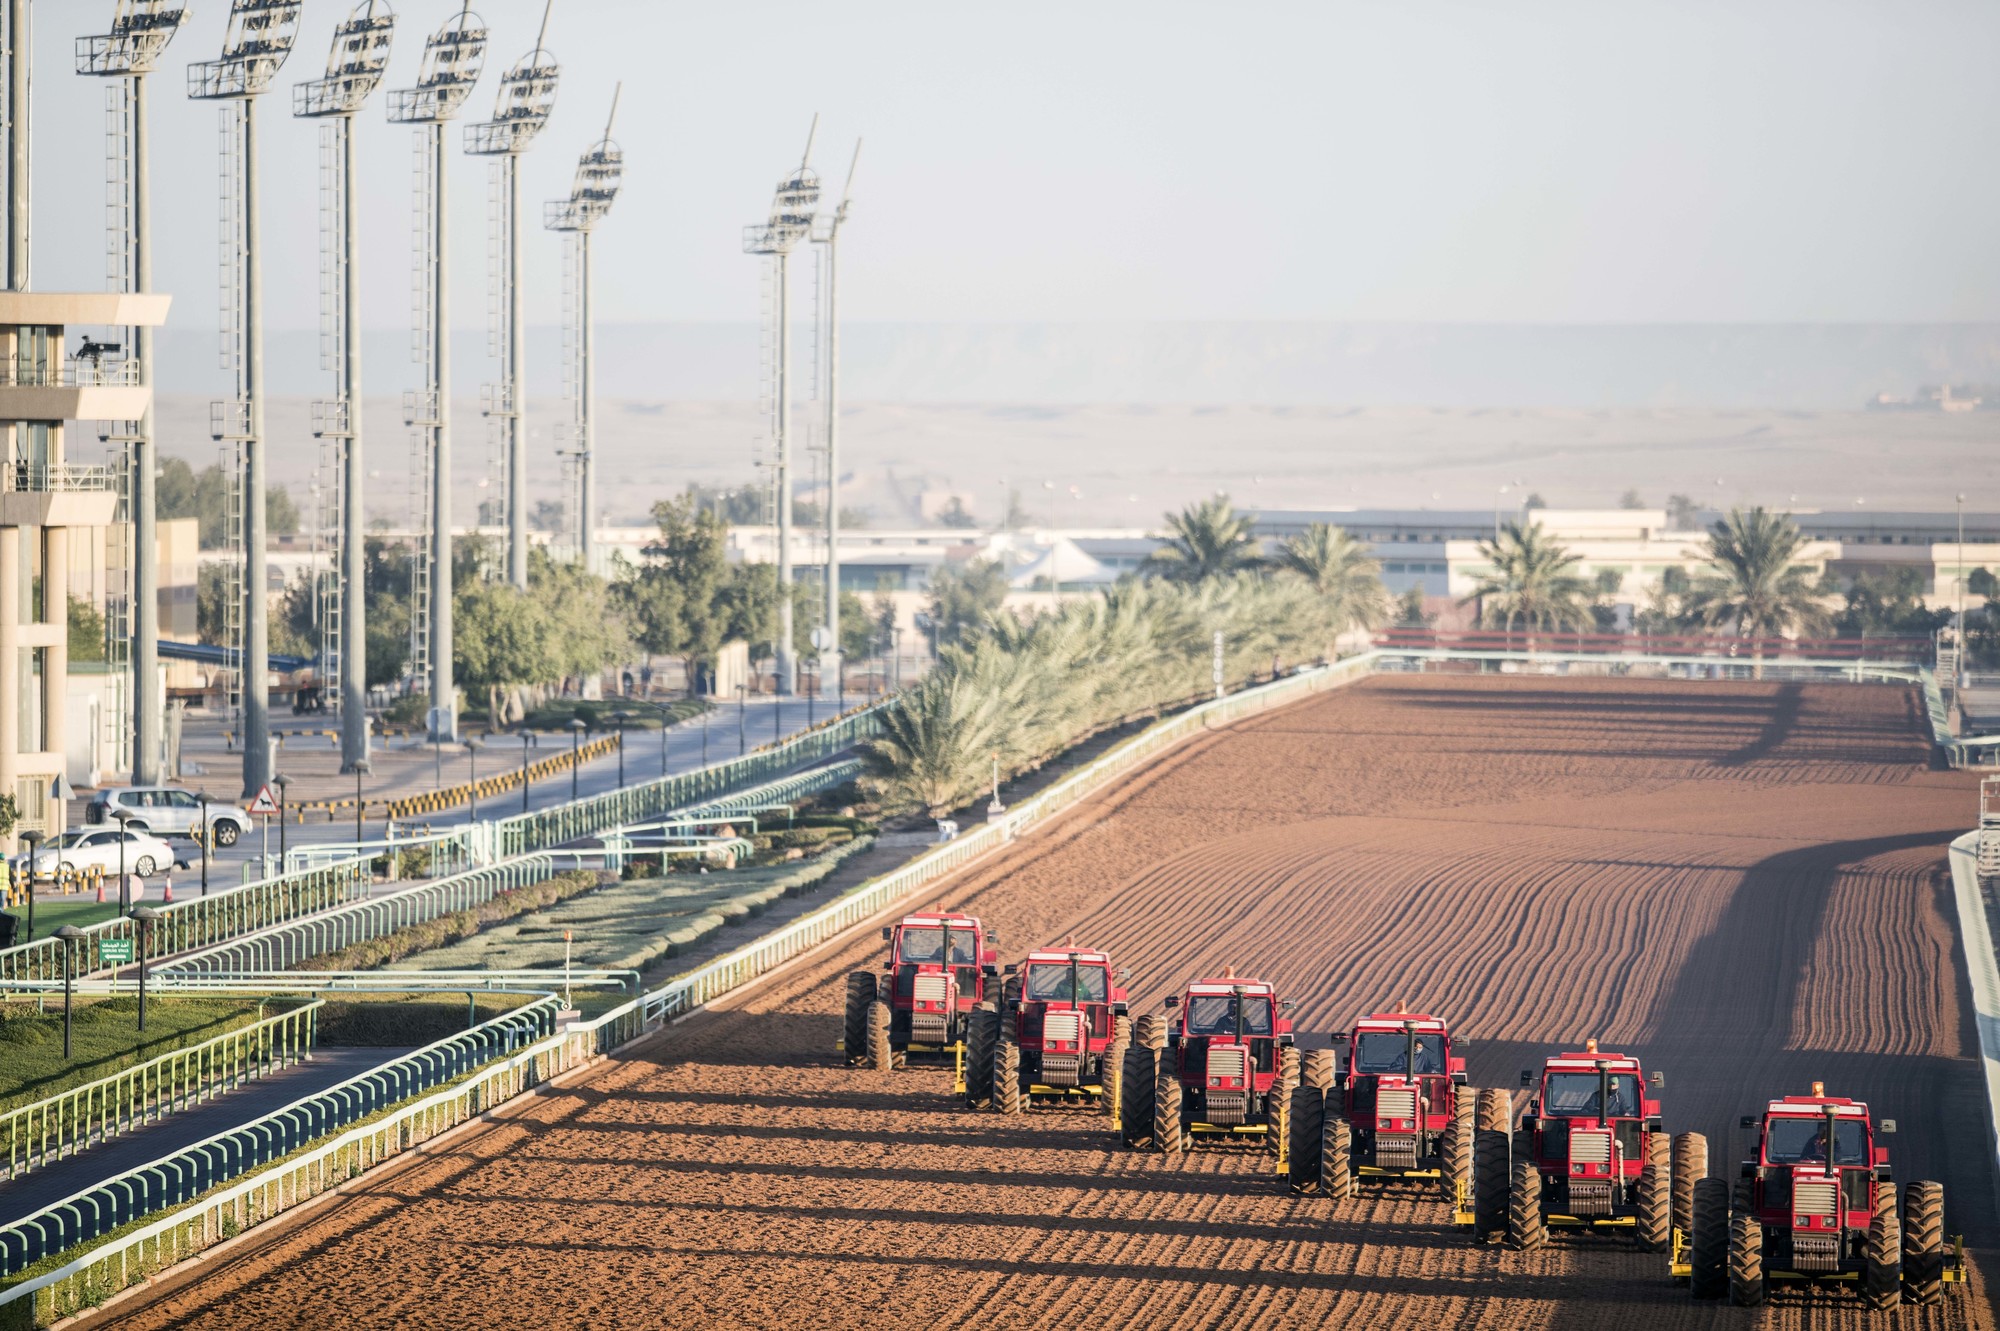 The King Abdulaziz dirt track: “It has always been, in my opinion, one of the top [ones] in the world,” says Prince Bandar. “The quality of the track has not changed for the past 20 years ... and we see no reason to make any changes to it.” Photo: Jockey Club of Saudi Arabia/Mahmoud Khaled